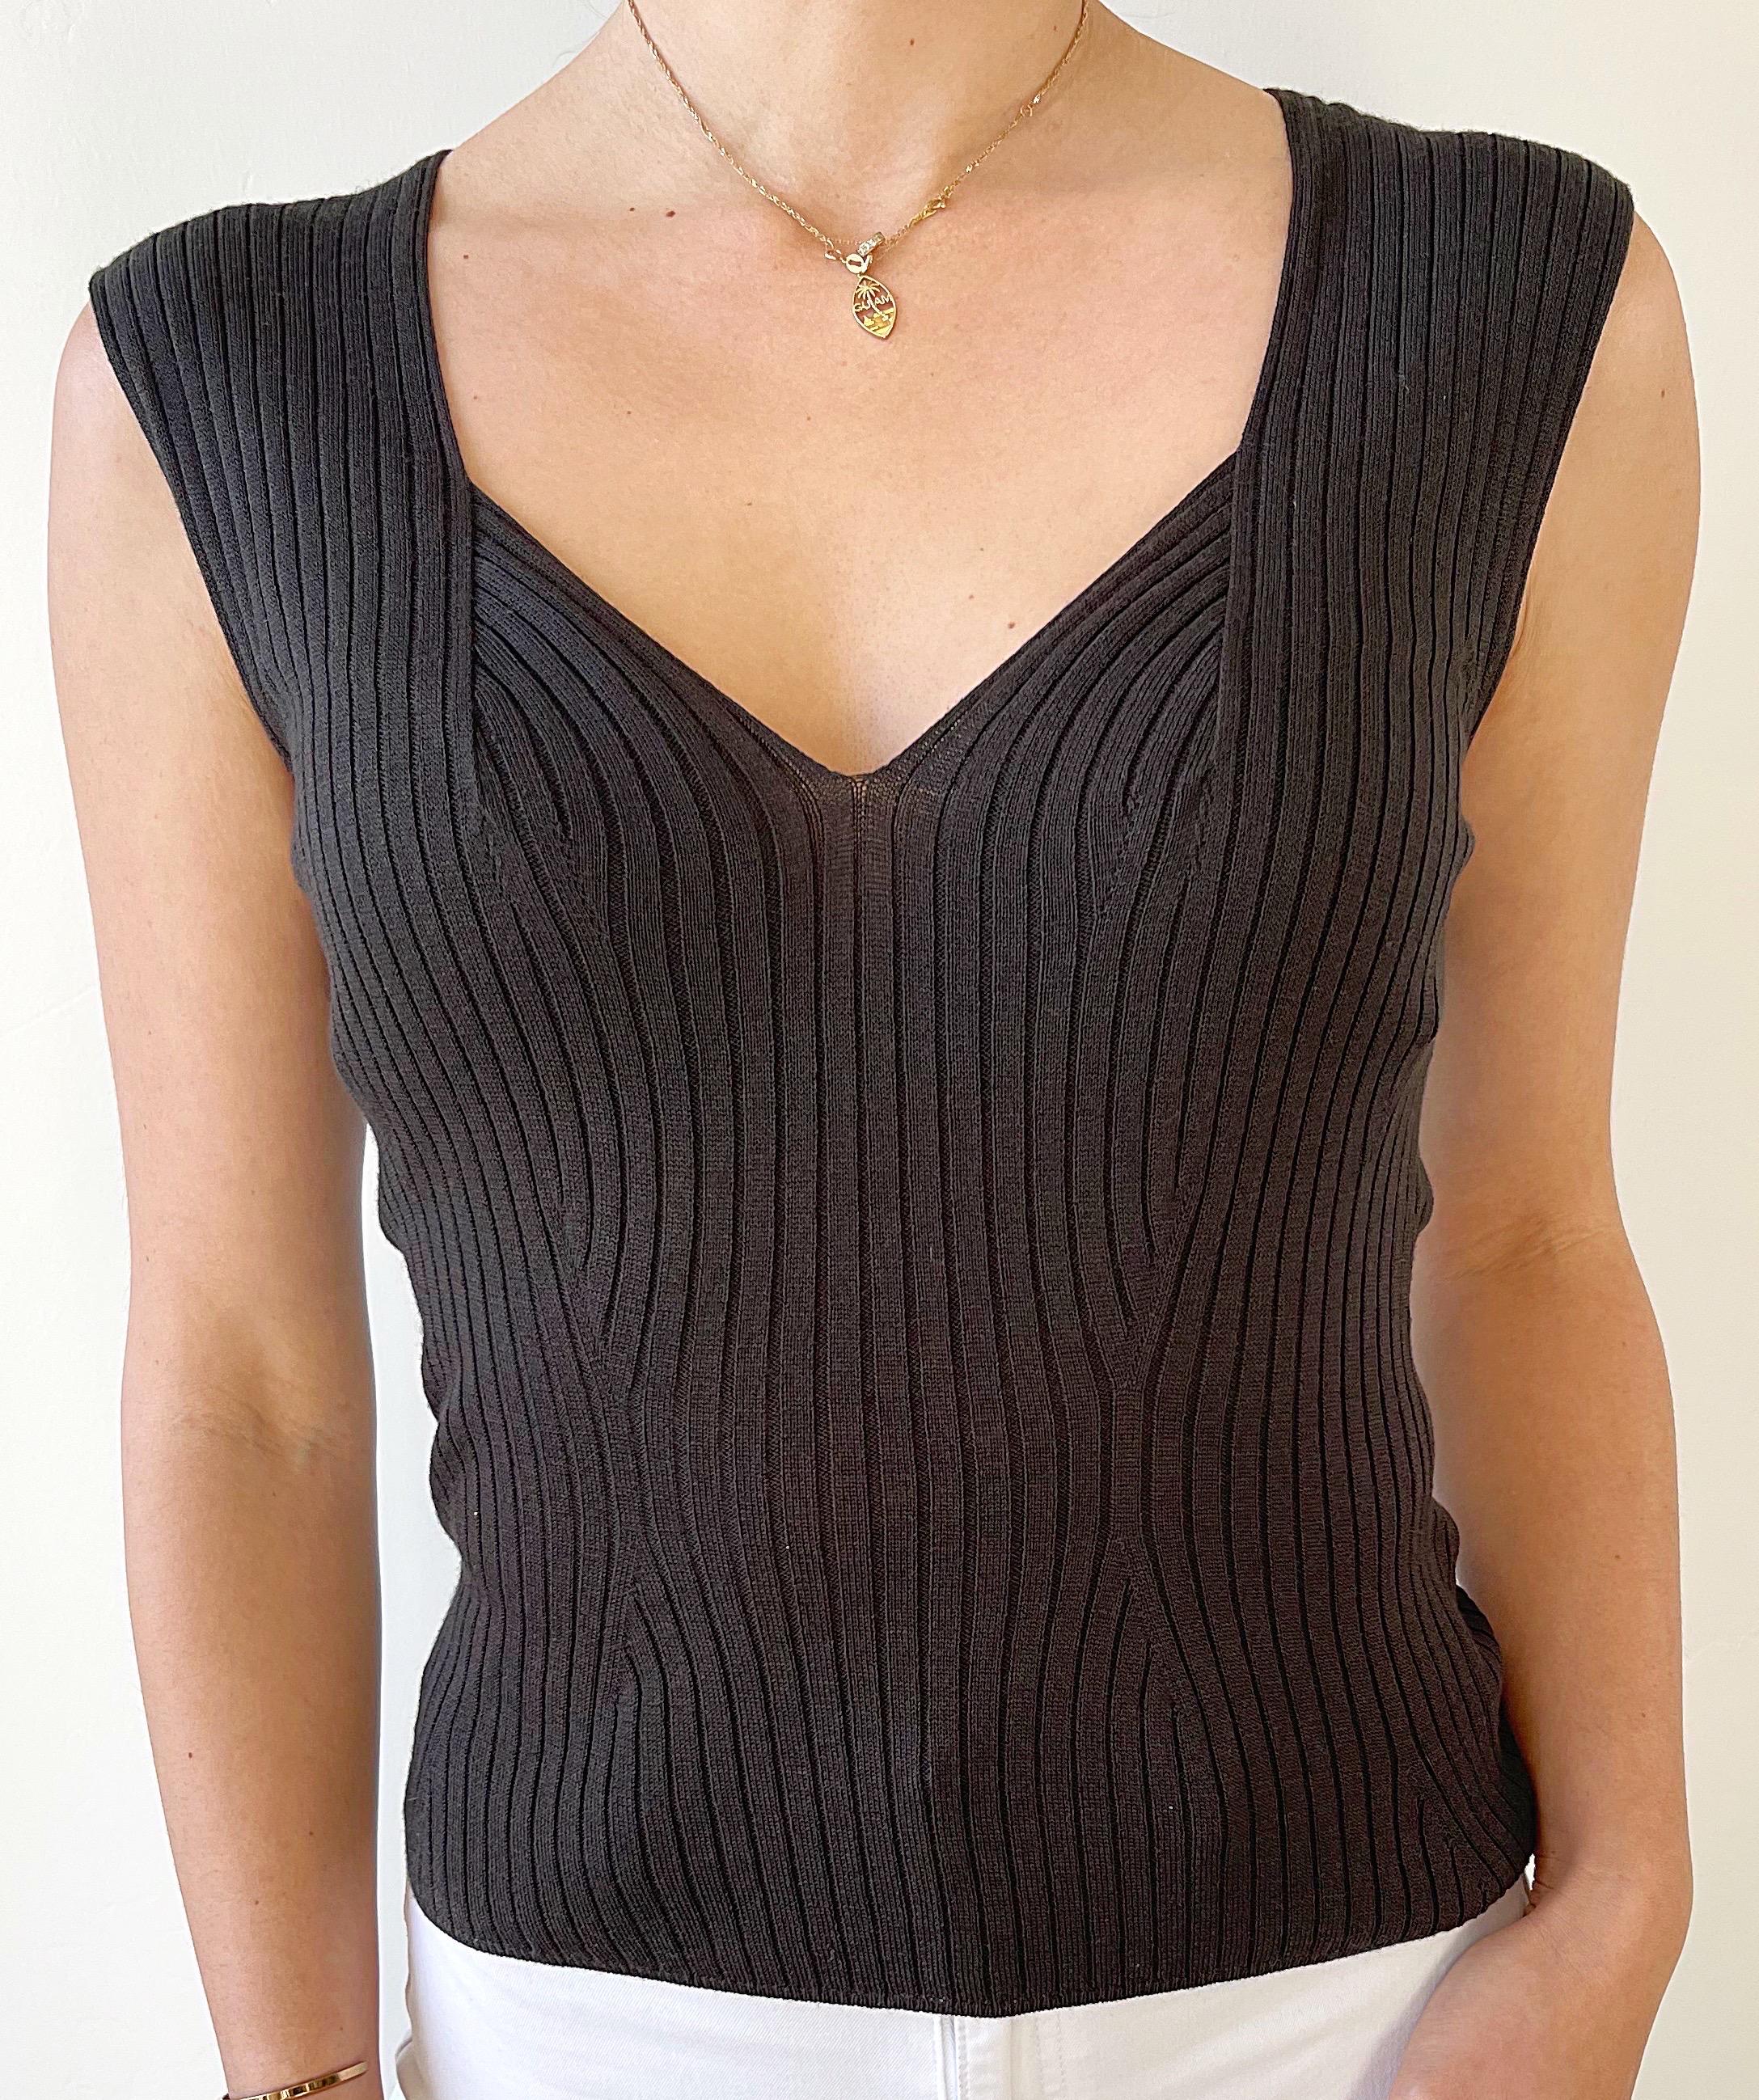 Yves Saint Laurent by Tom Ford Spring 2003 Brown Ribbed Sleeveless Vintage Top For Sale 10